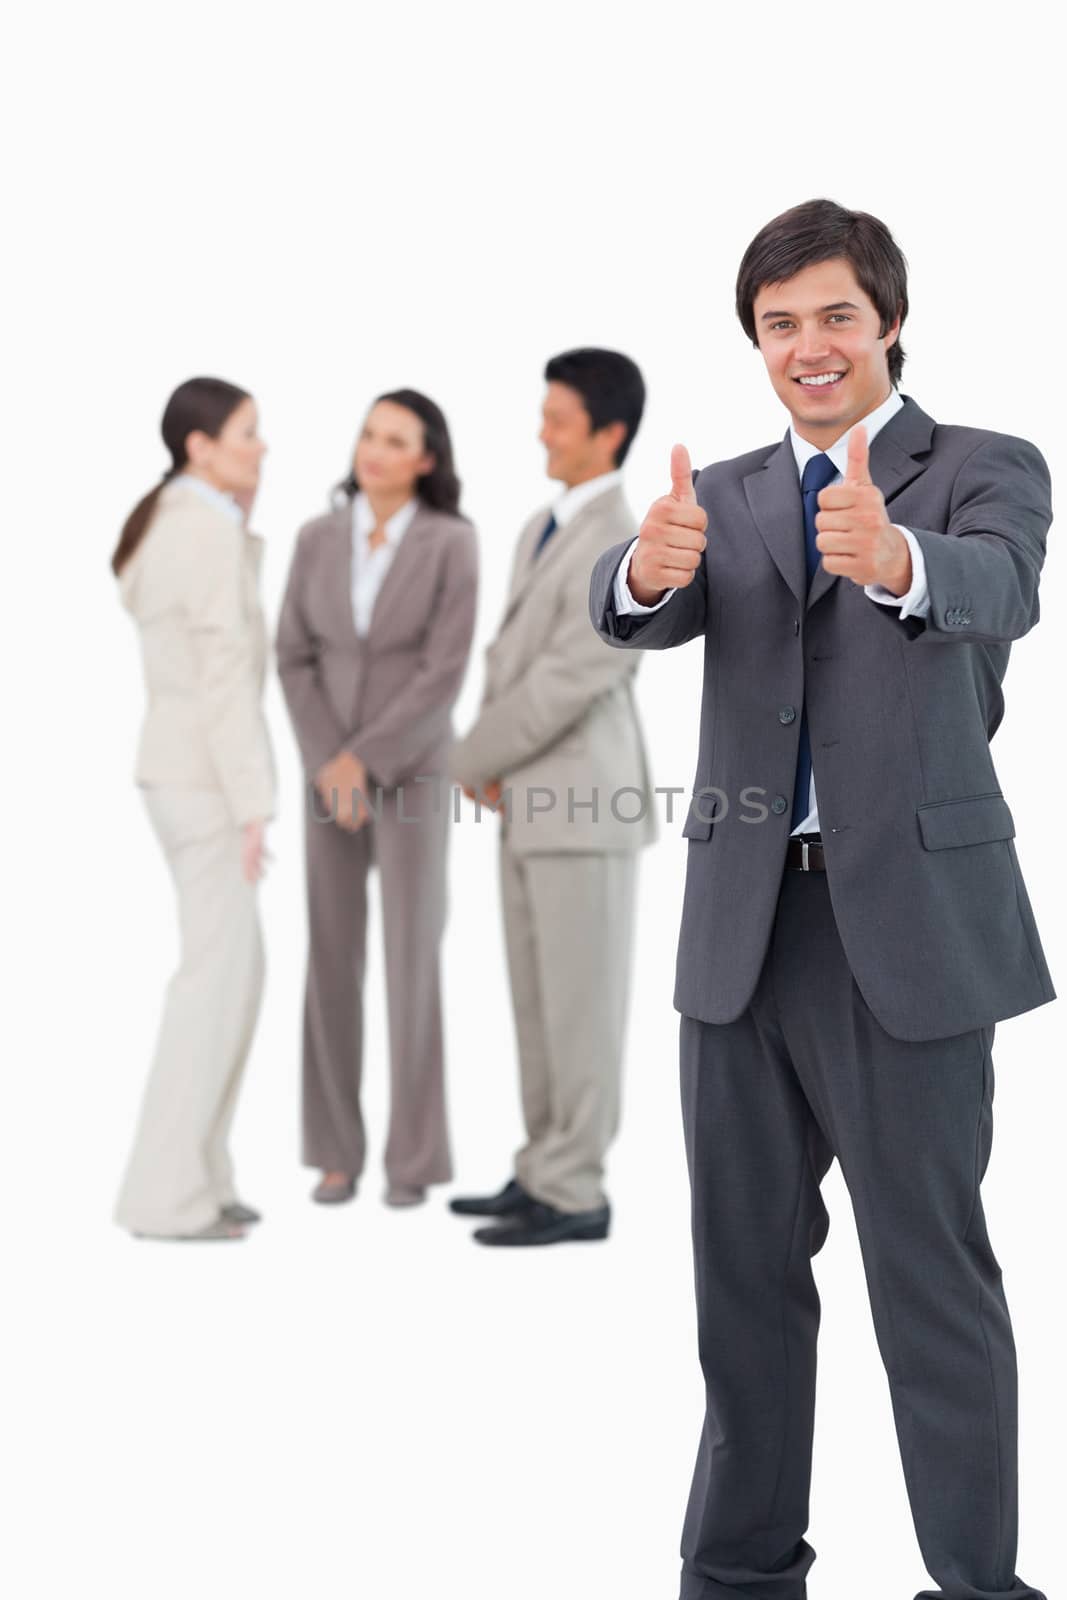 Salesman giving thumbs up with colleagues behind him against a white background